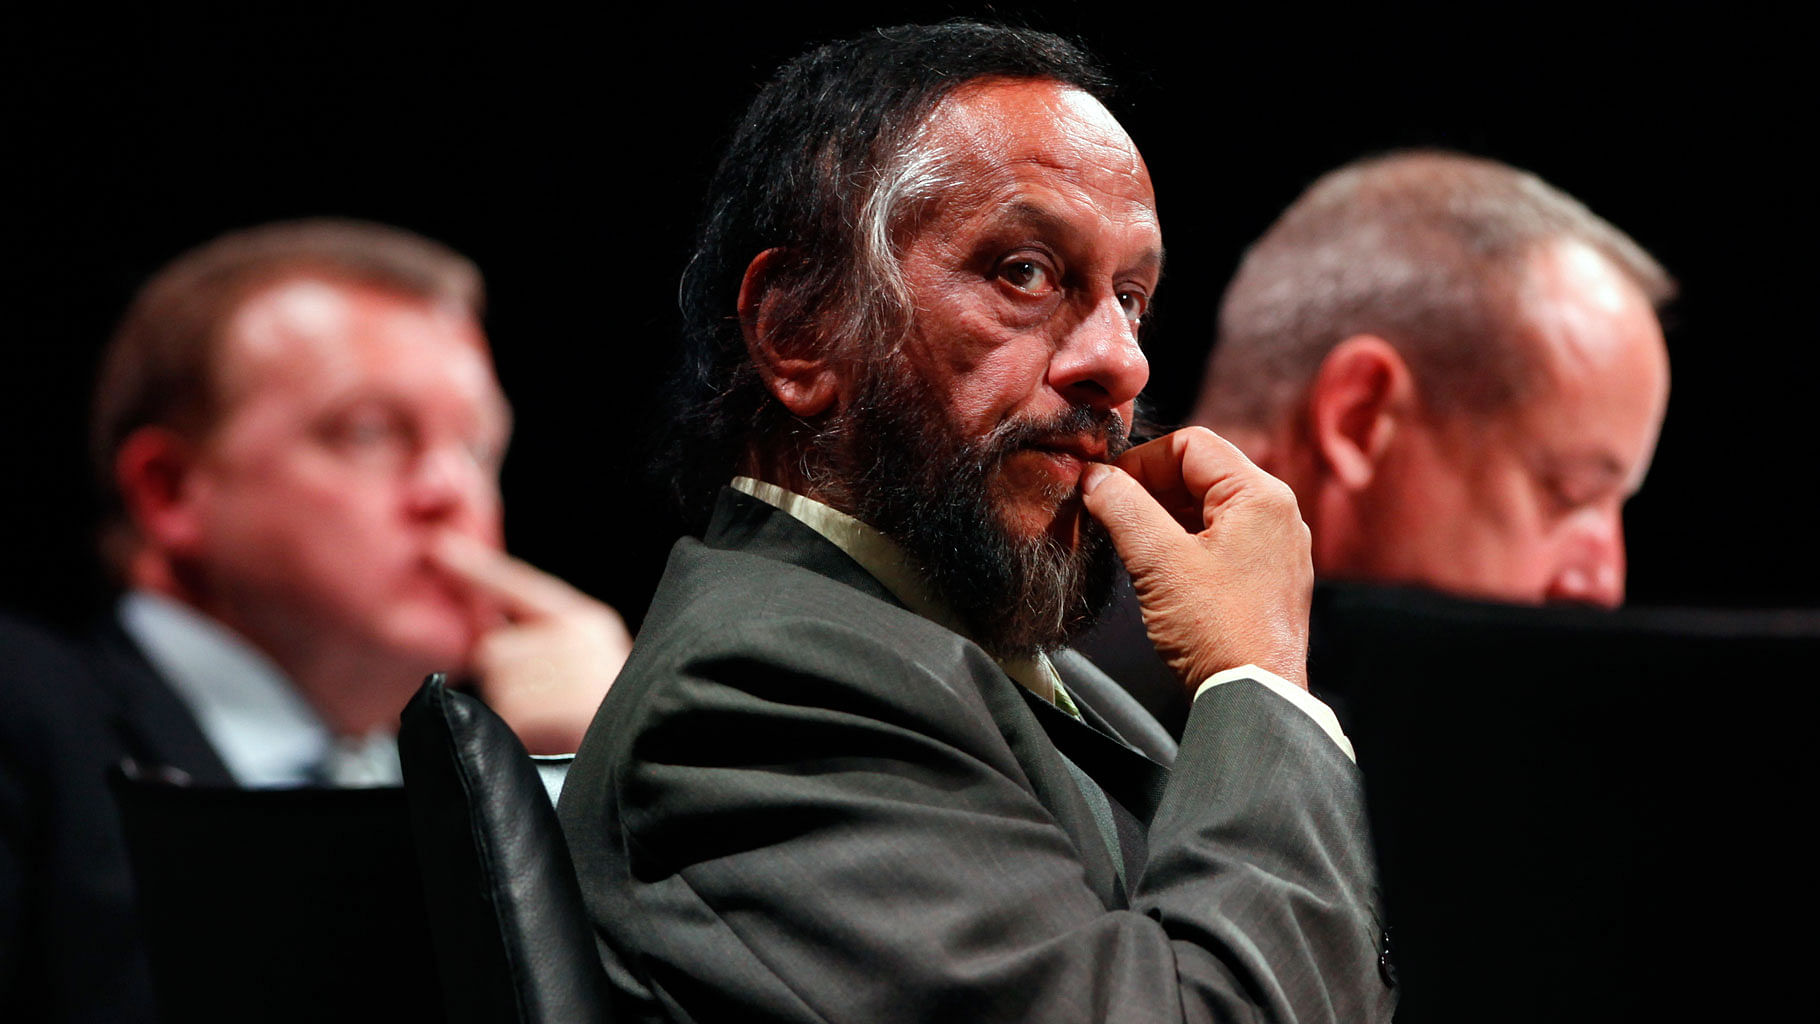 Dr Rajendra Kumar Pachauri is the chair of the Intergovernmental Panel on Climate Change. (Photo: Reuters)